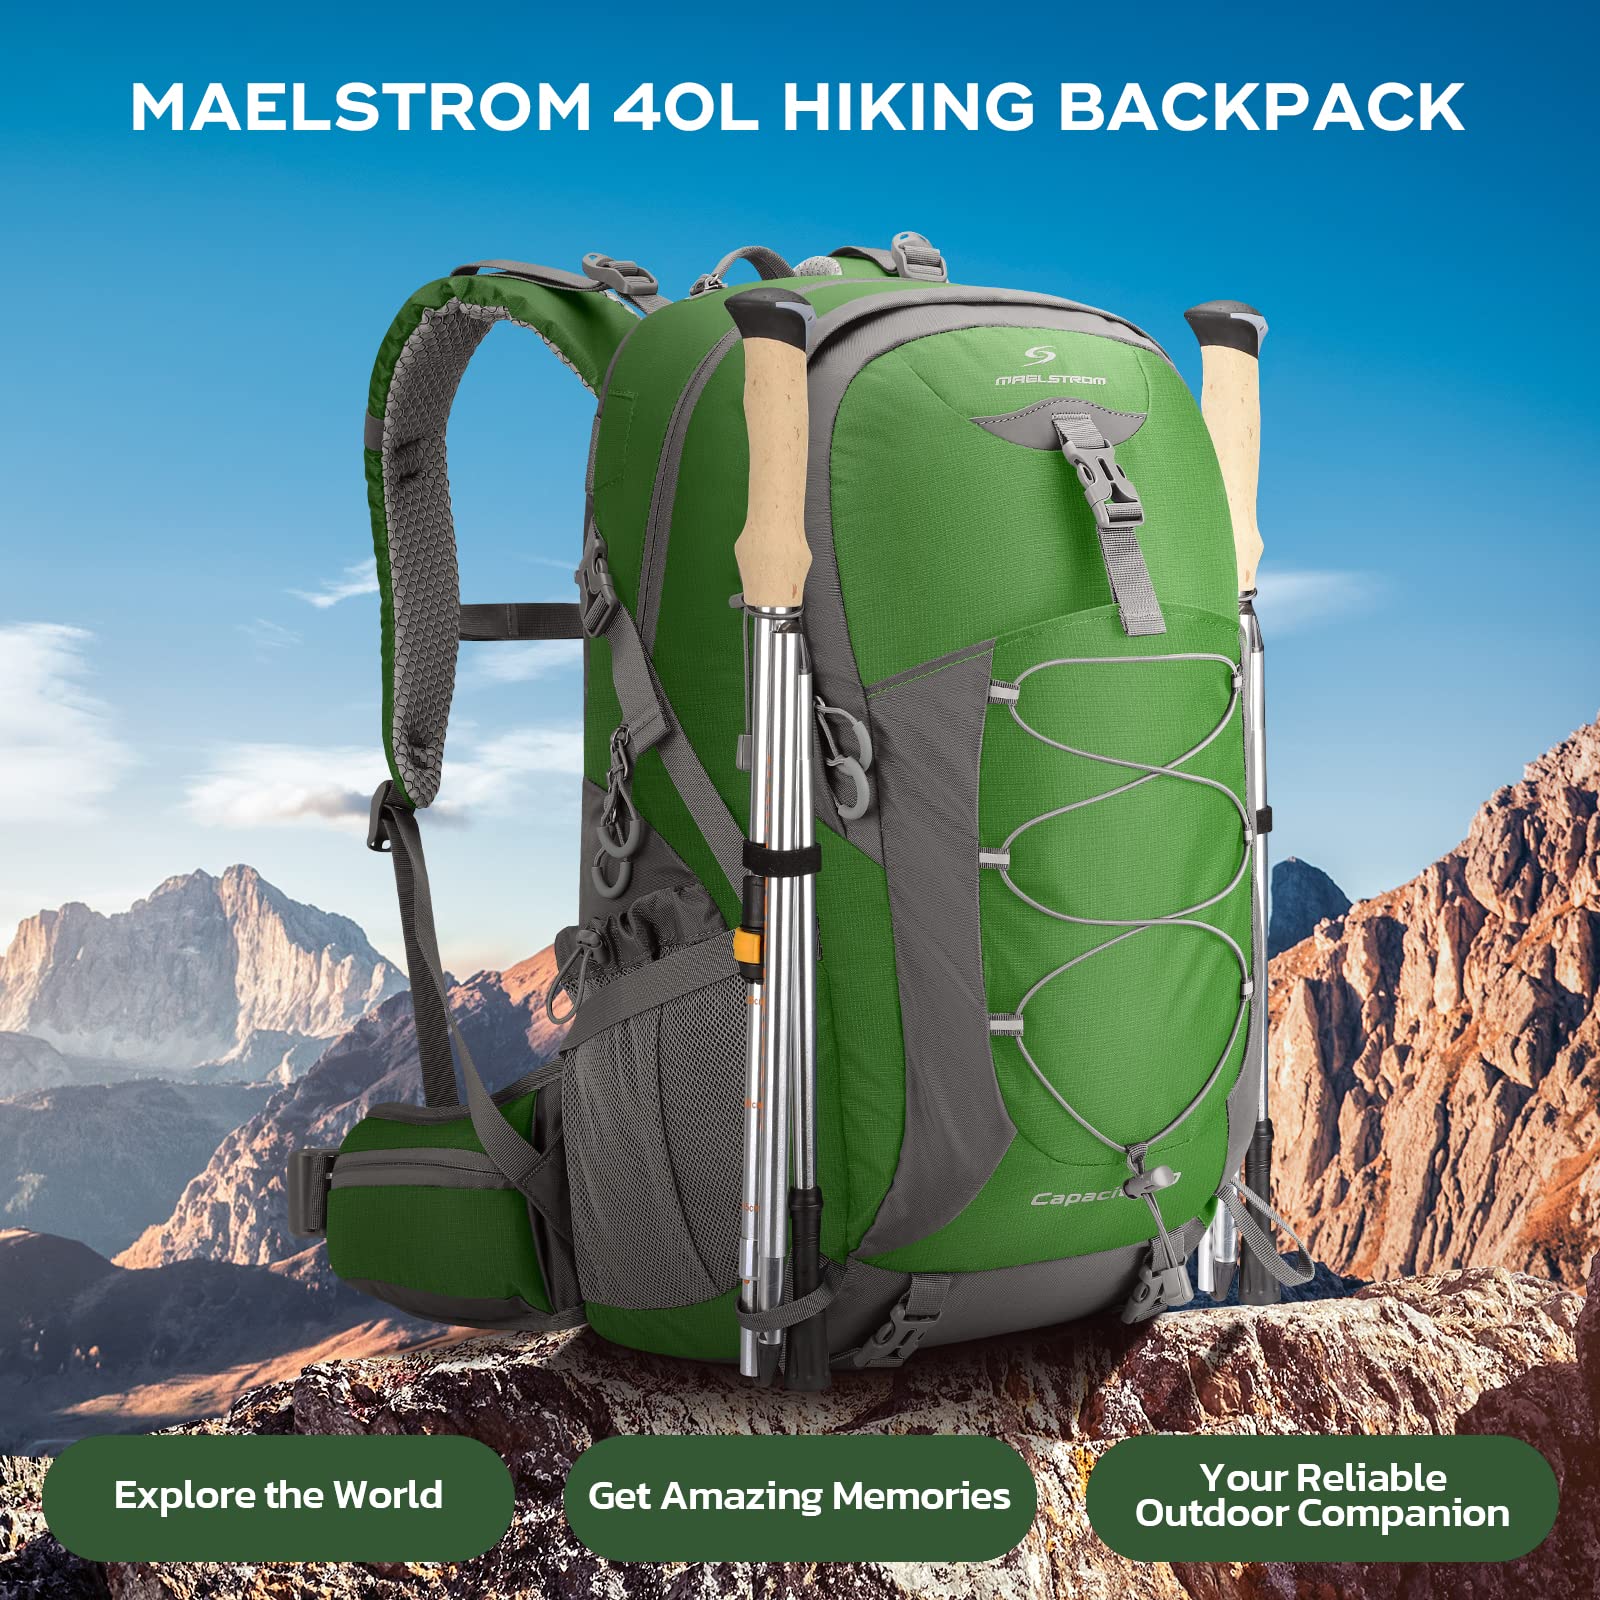 Maelstrom Hiking Backpack,Camping Backpack,40L Waterproof Hiking Daypack with Rain Cover,Lightweight Travel Backpack,Green